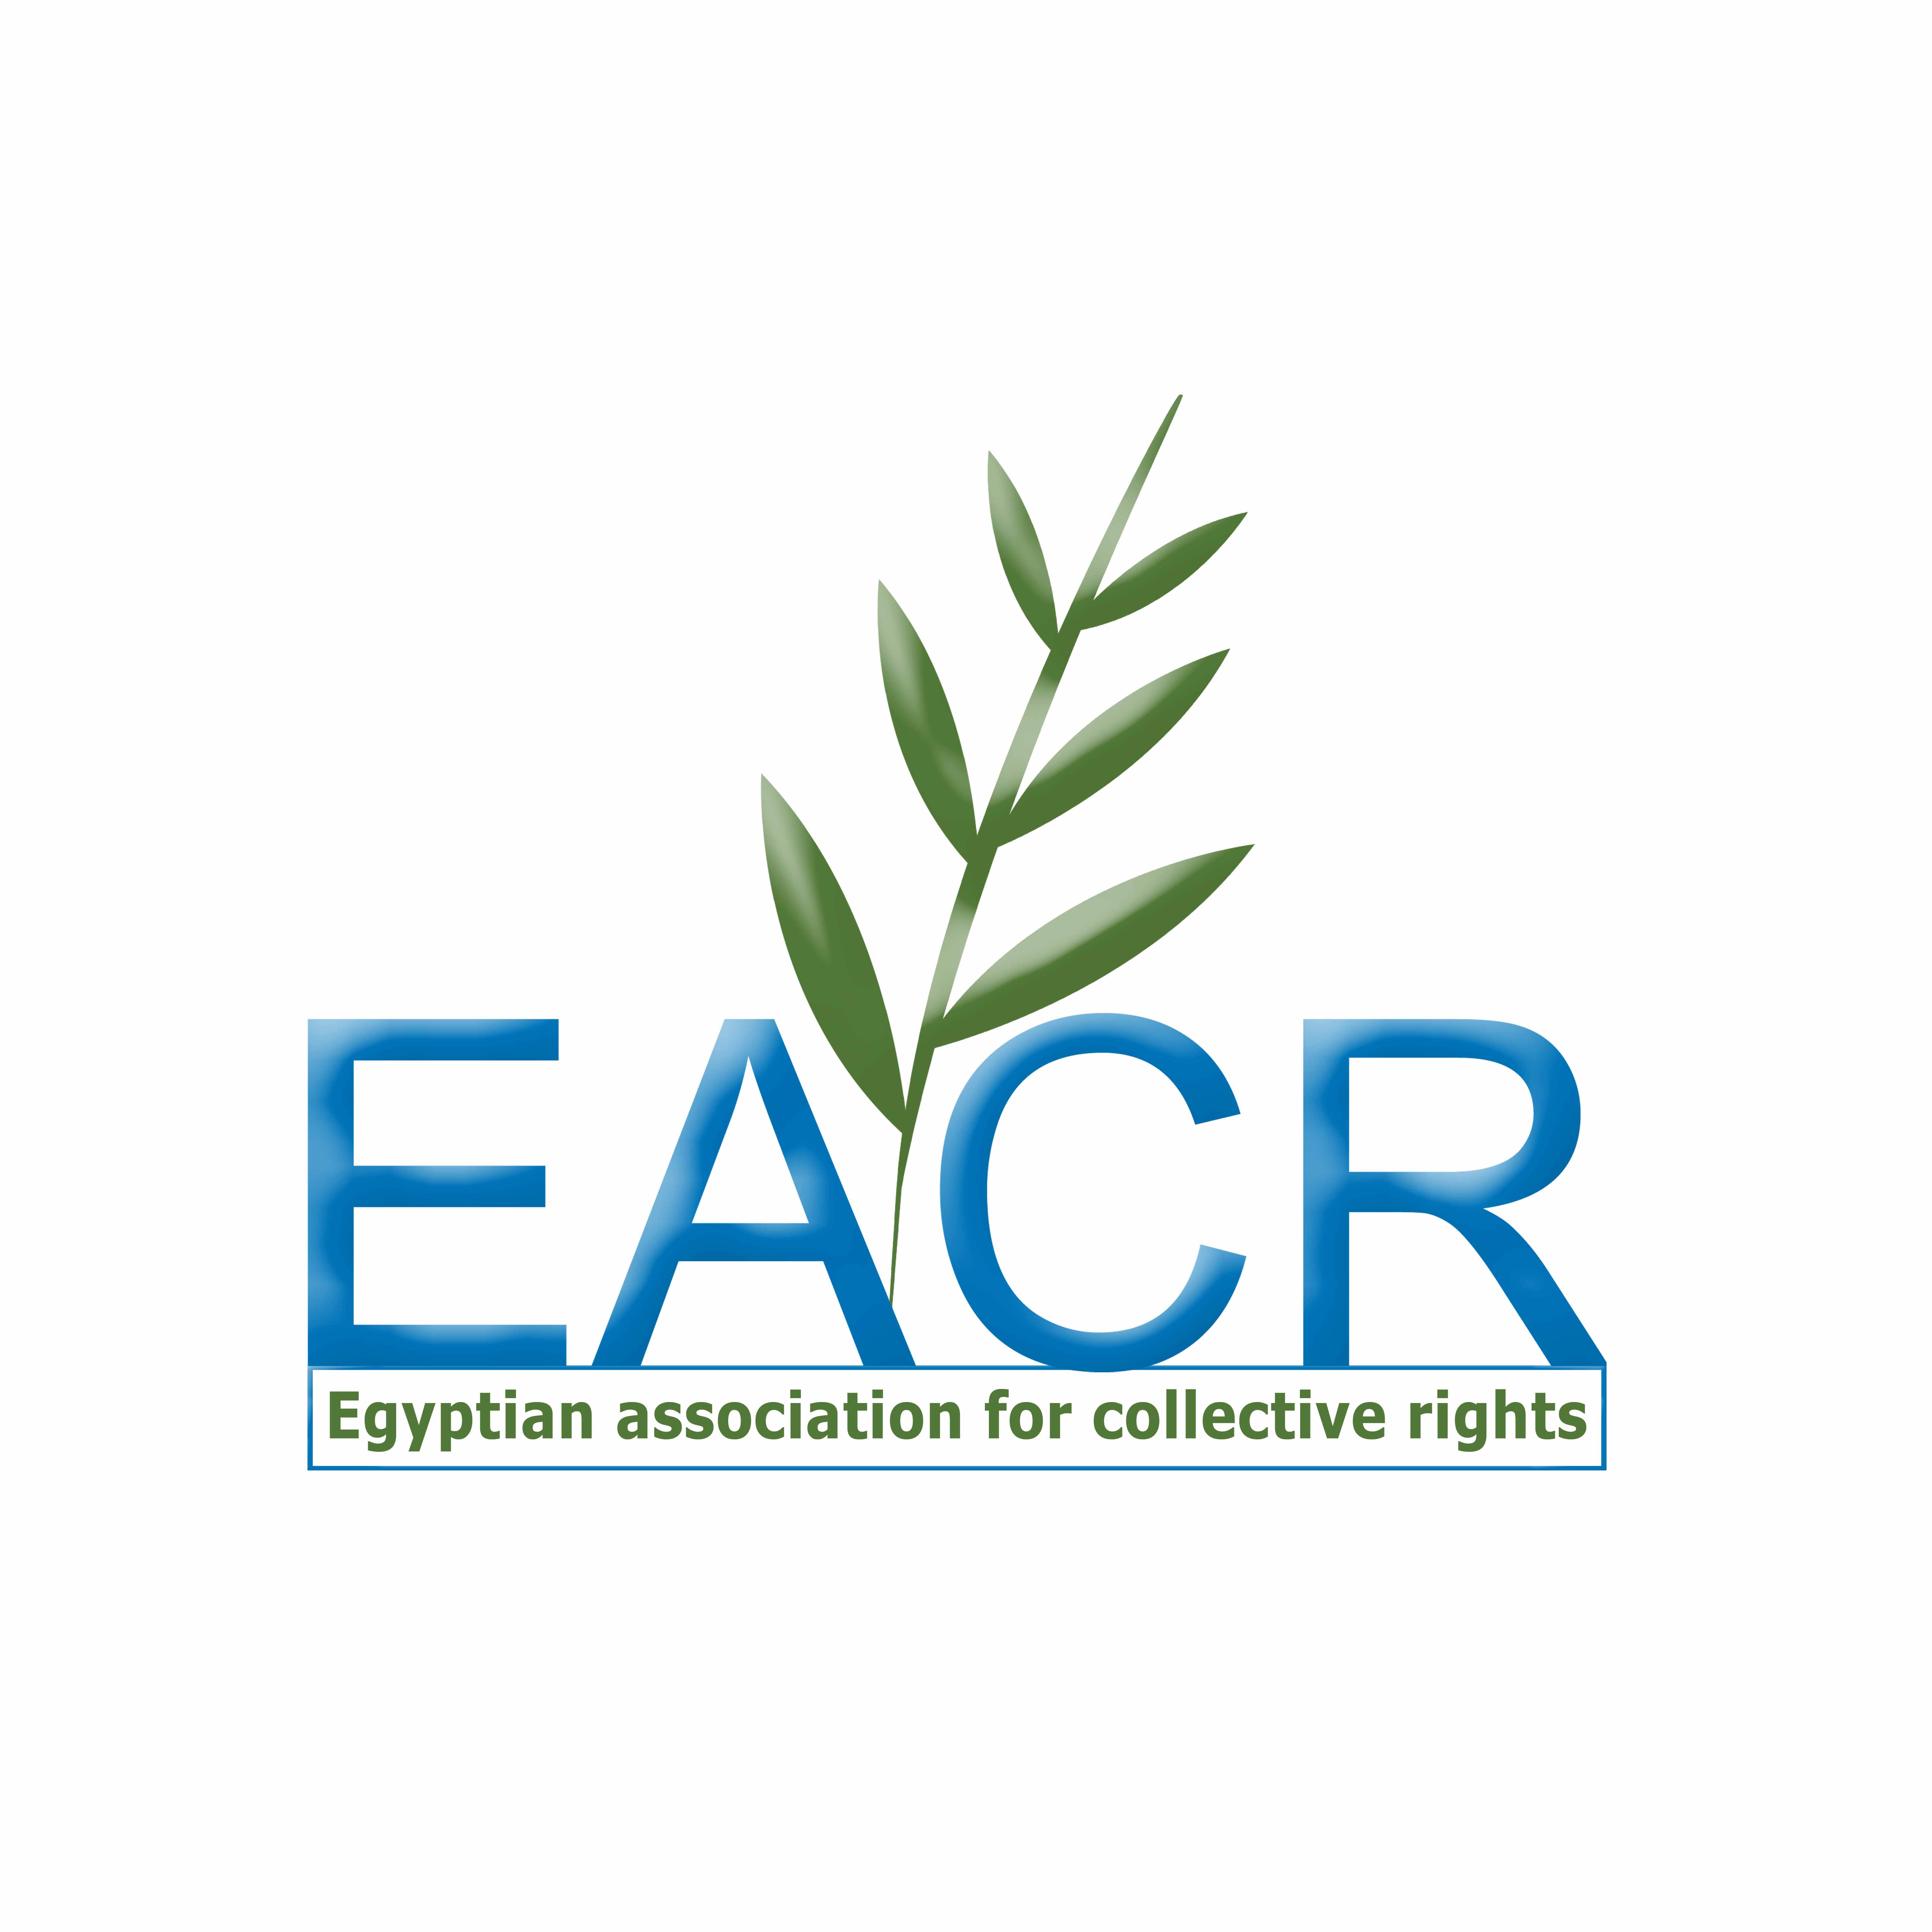 The Egyptian Association for Collective Rights